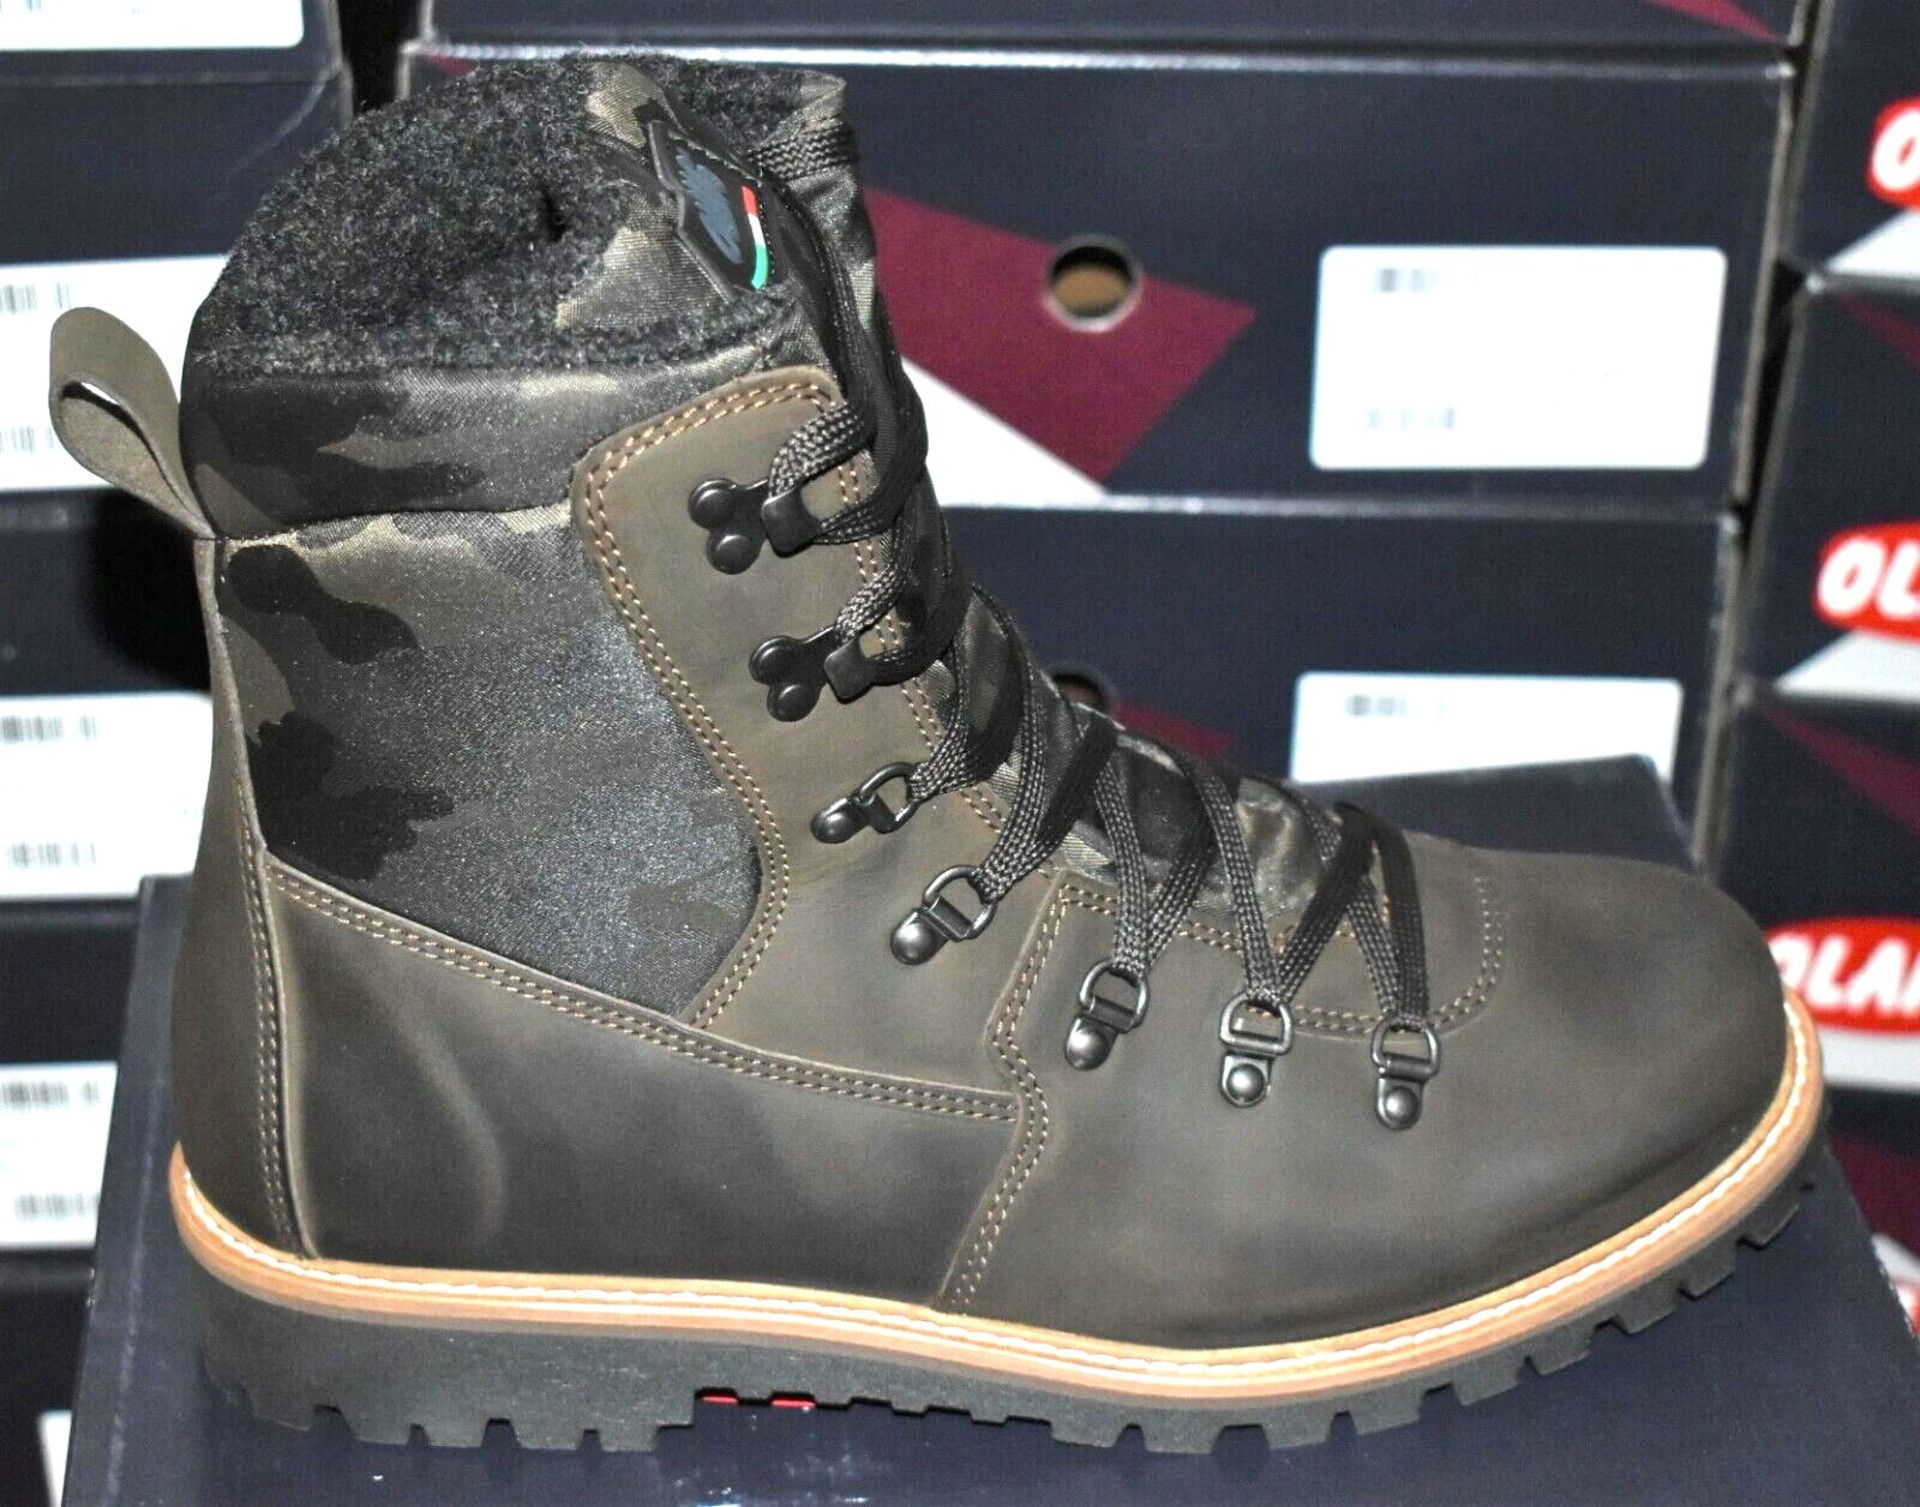 1 x Pair of Designer Olang Men's Winter Boots - Piave Thinsulate BTX 84 Caffe - Euro Size 44 - - Image 3 of 6